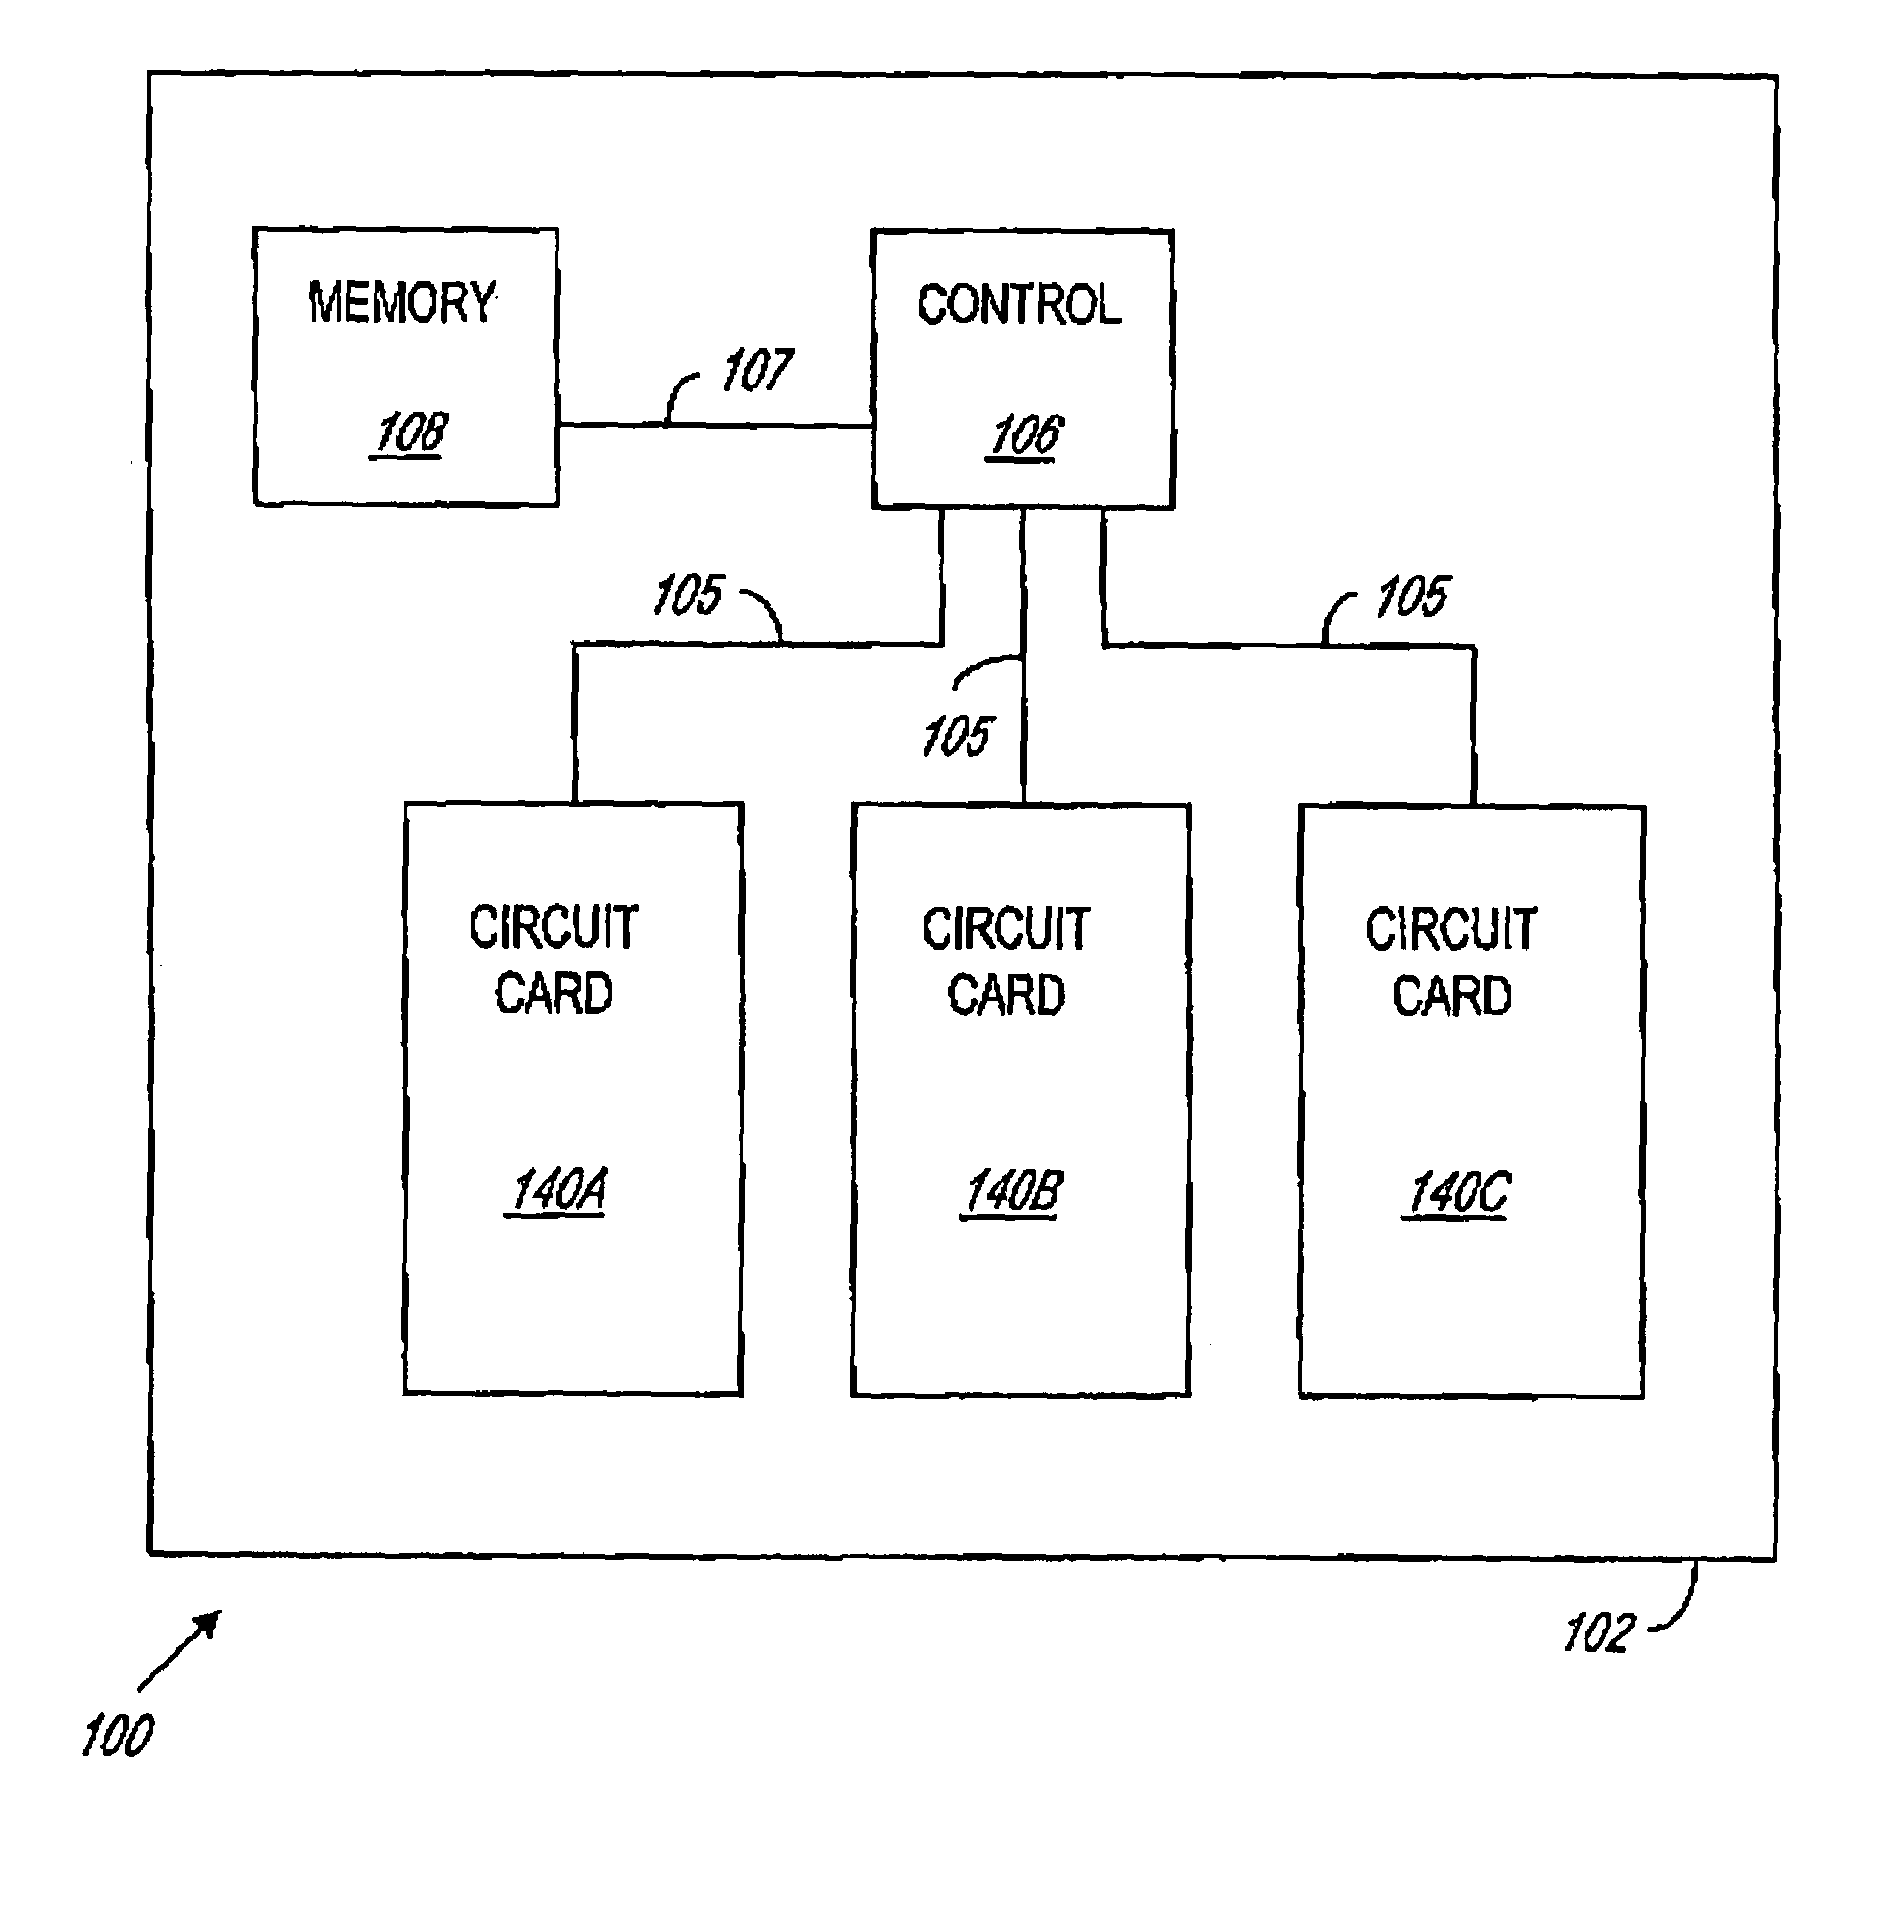 System and method for tracking utilization data for an electronic device